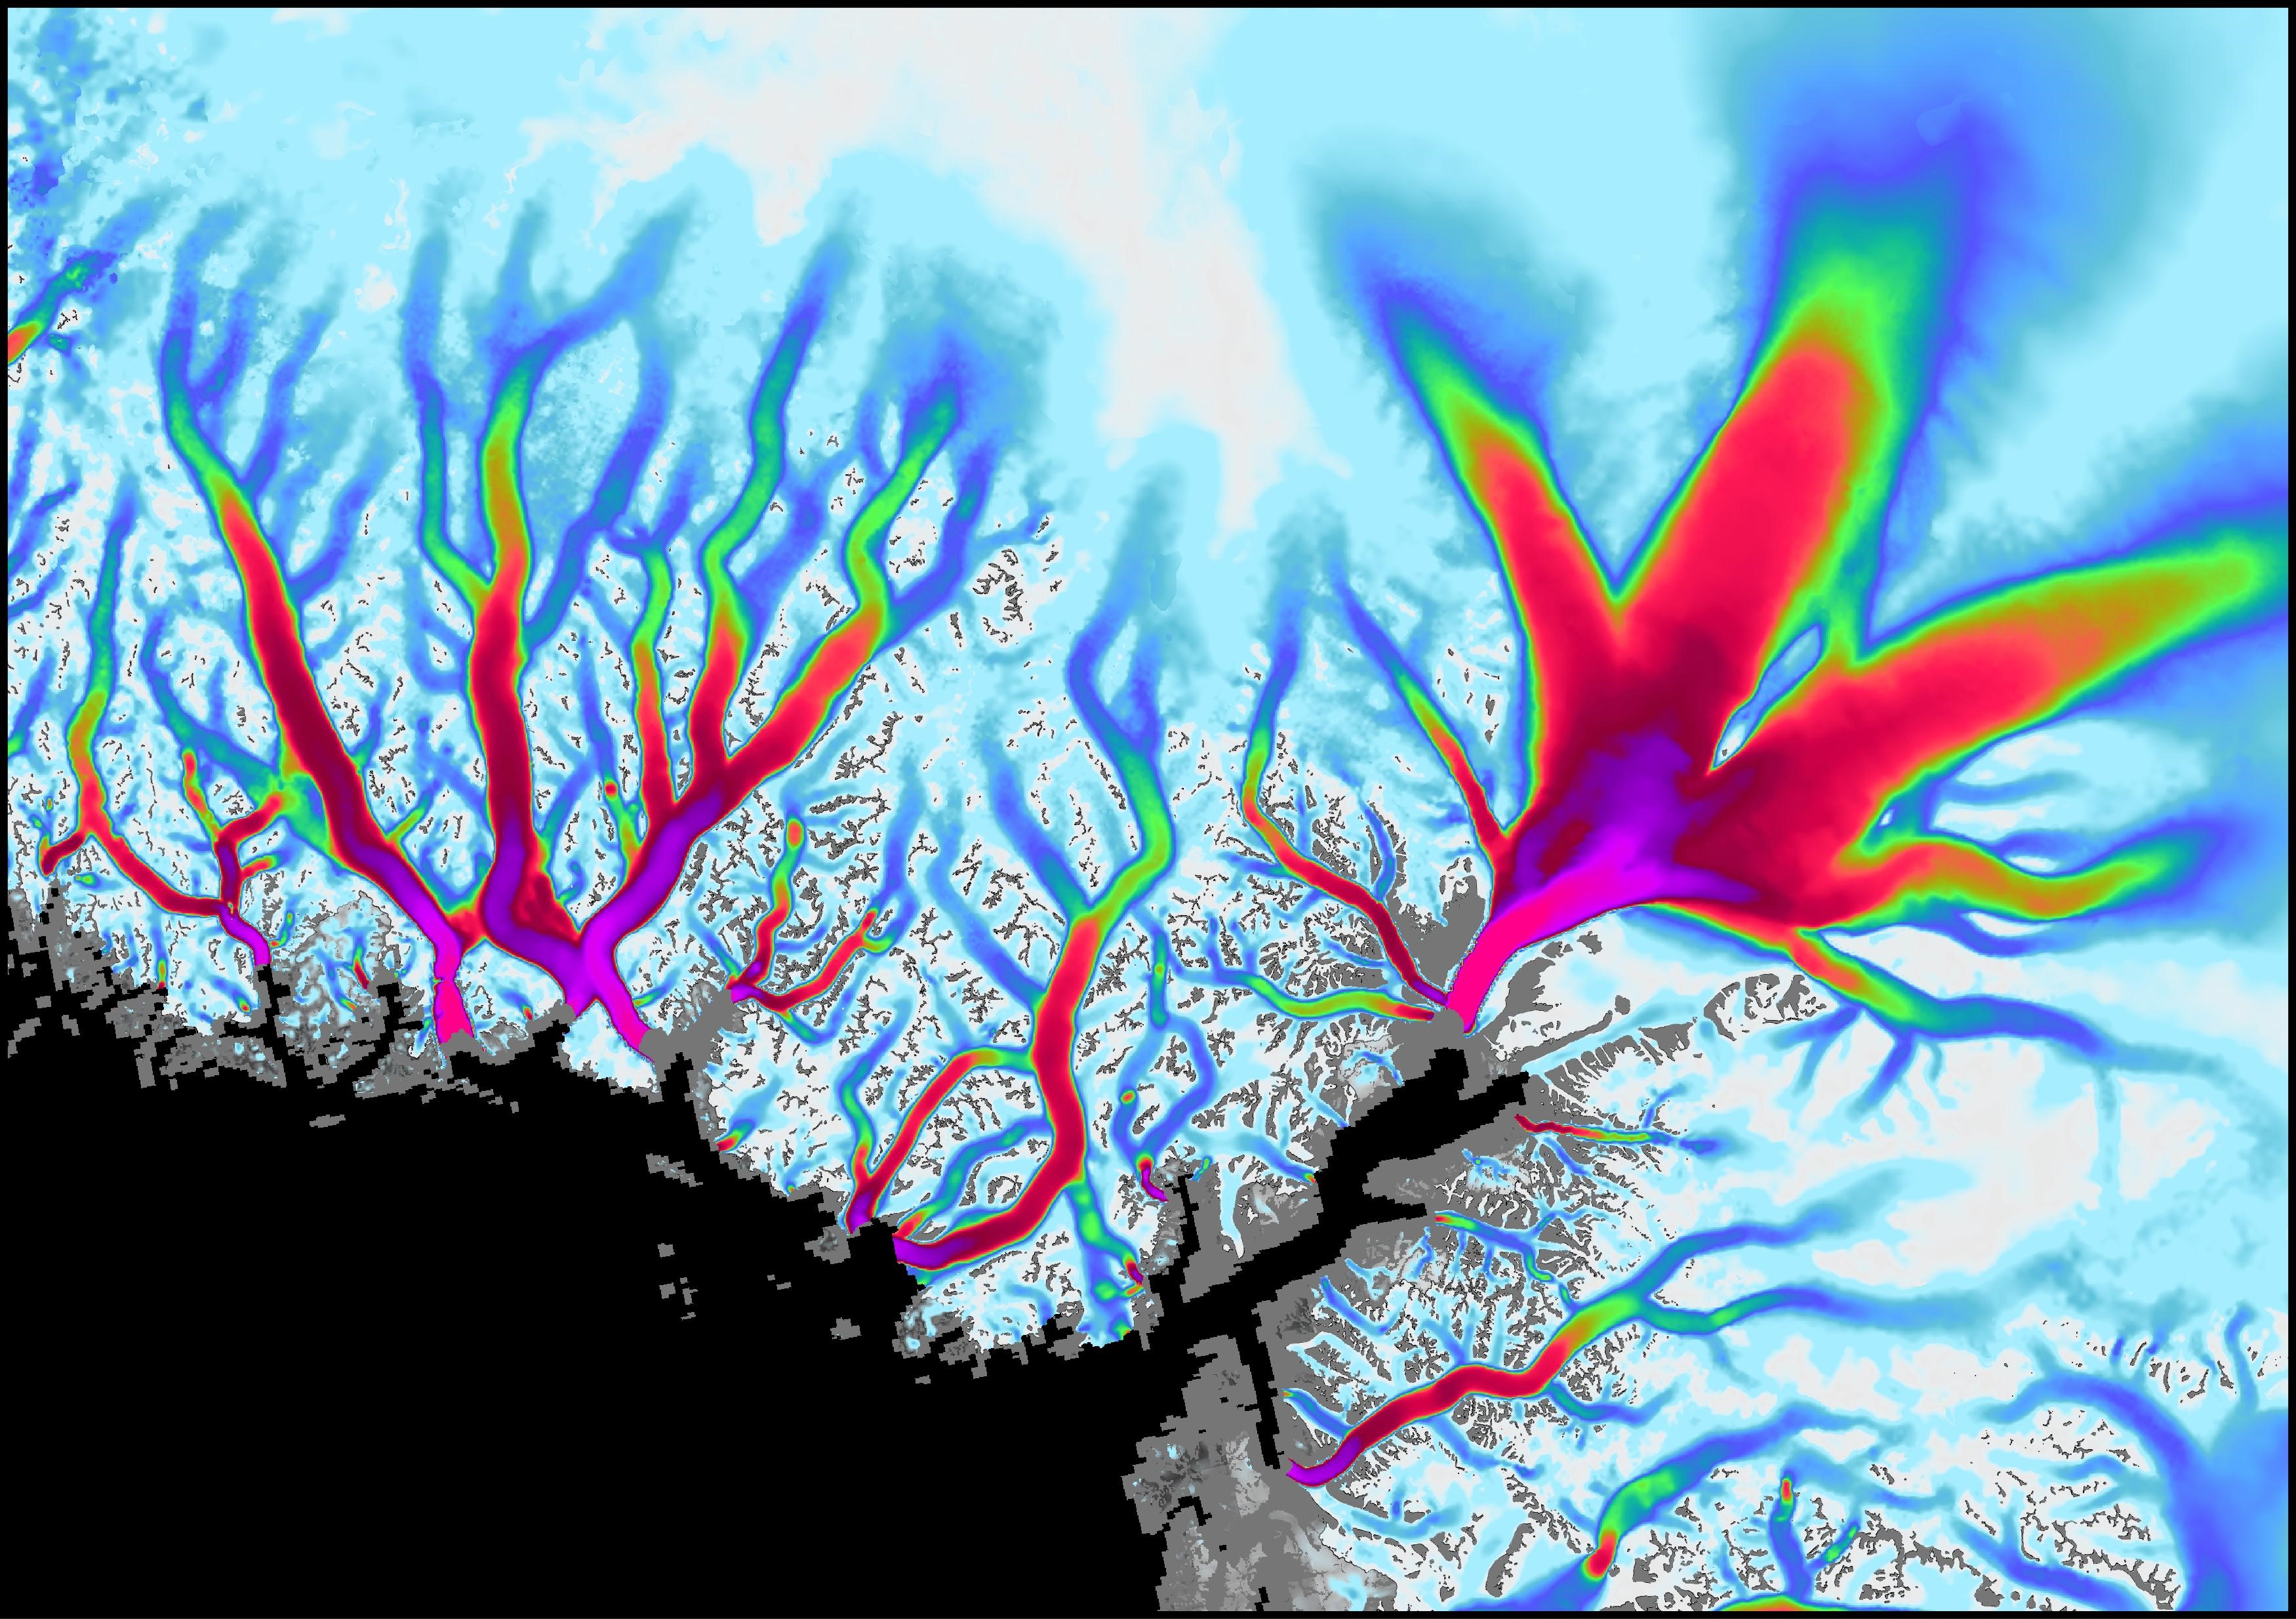 This data visualization shows the flow velocity of glaciers along Greenland's coast.